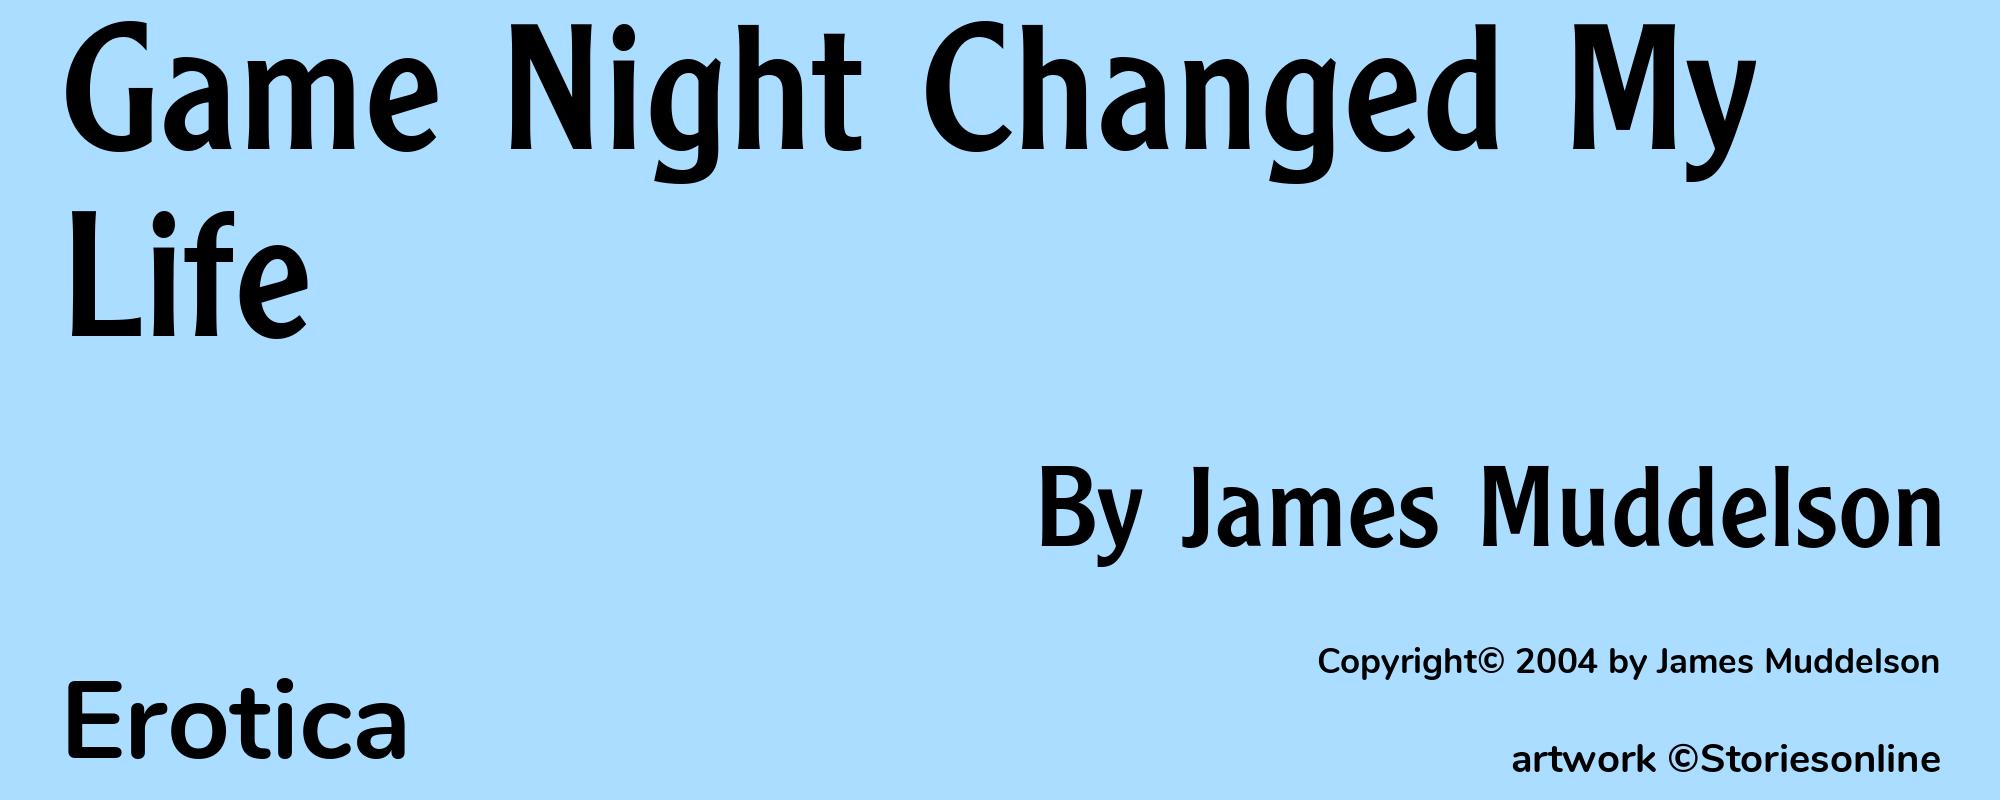 Game Night Changed My Life - Cover